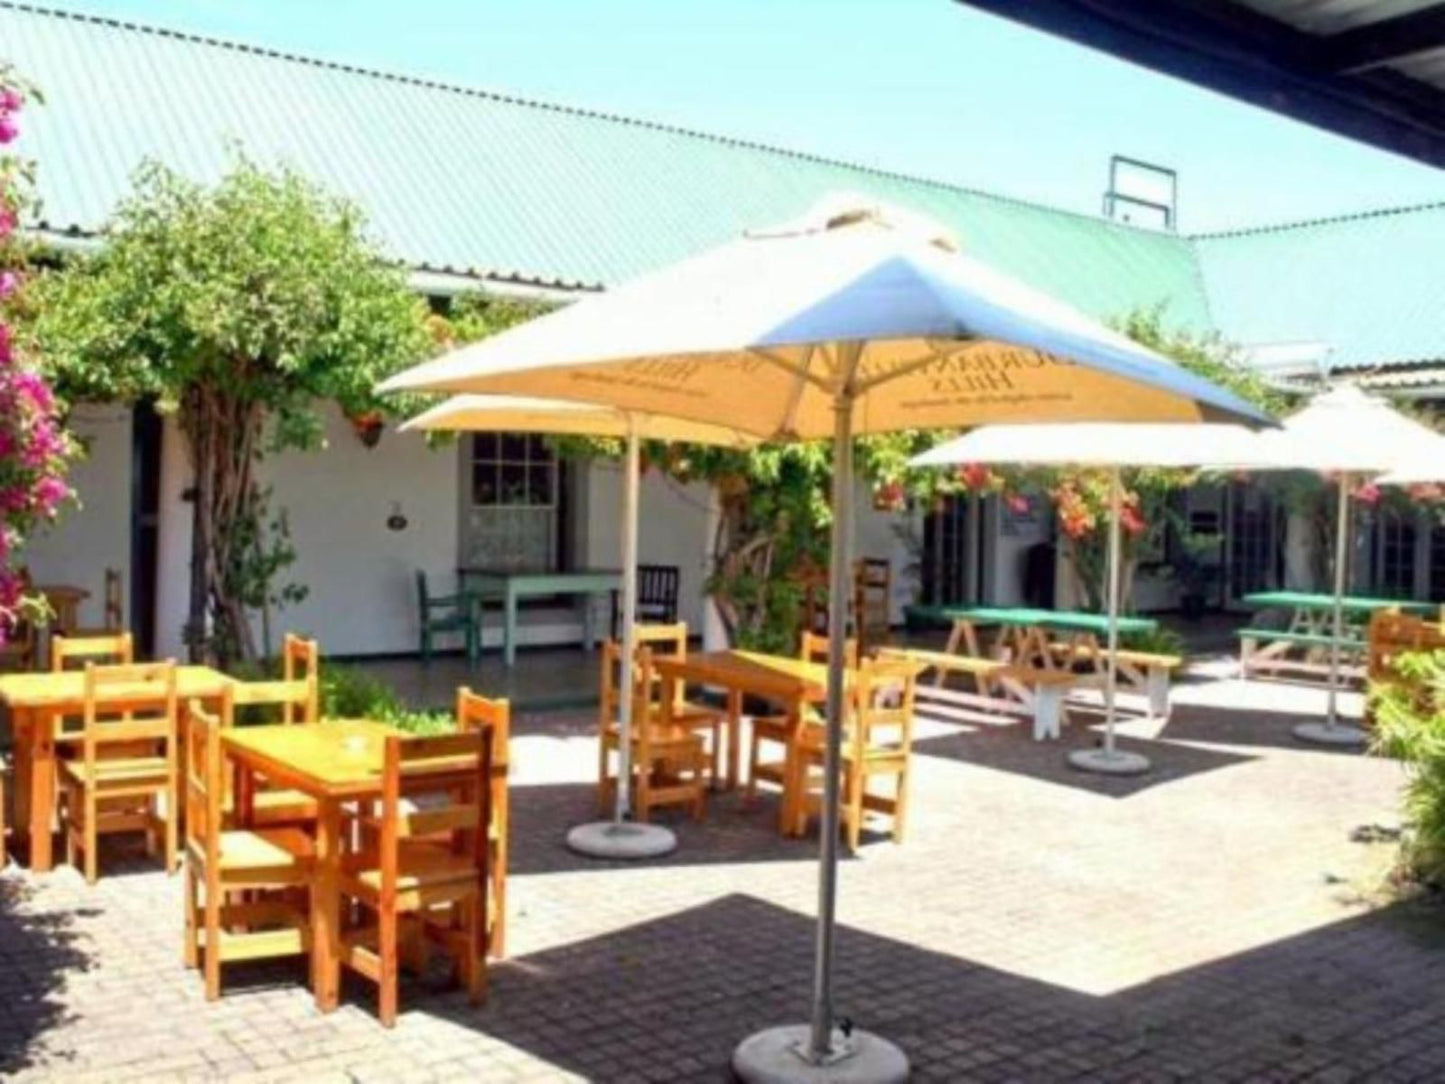 Albertinia Hotel Albertinia Western Cape South Africa Complementary Colors, Restaurant, Bar